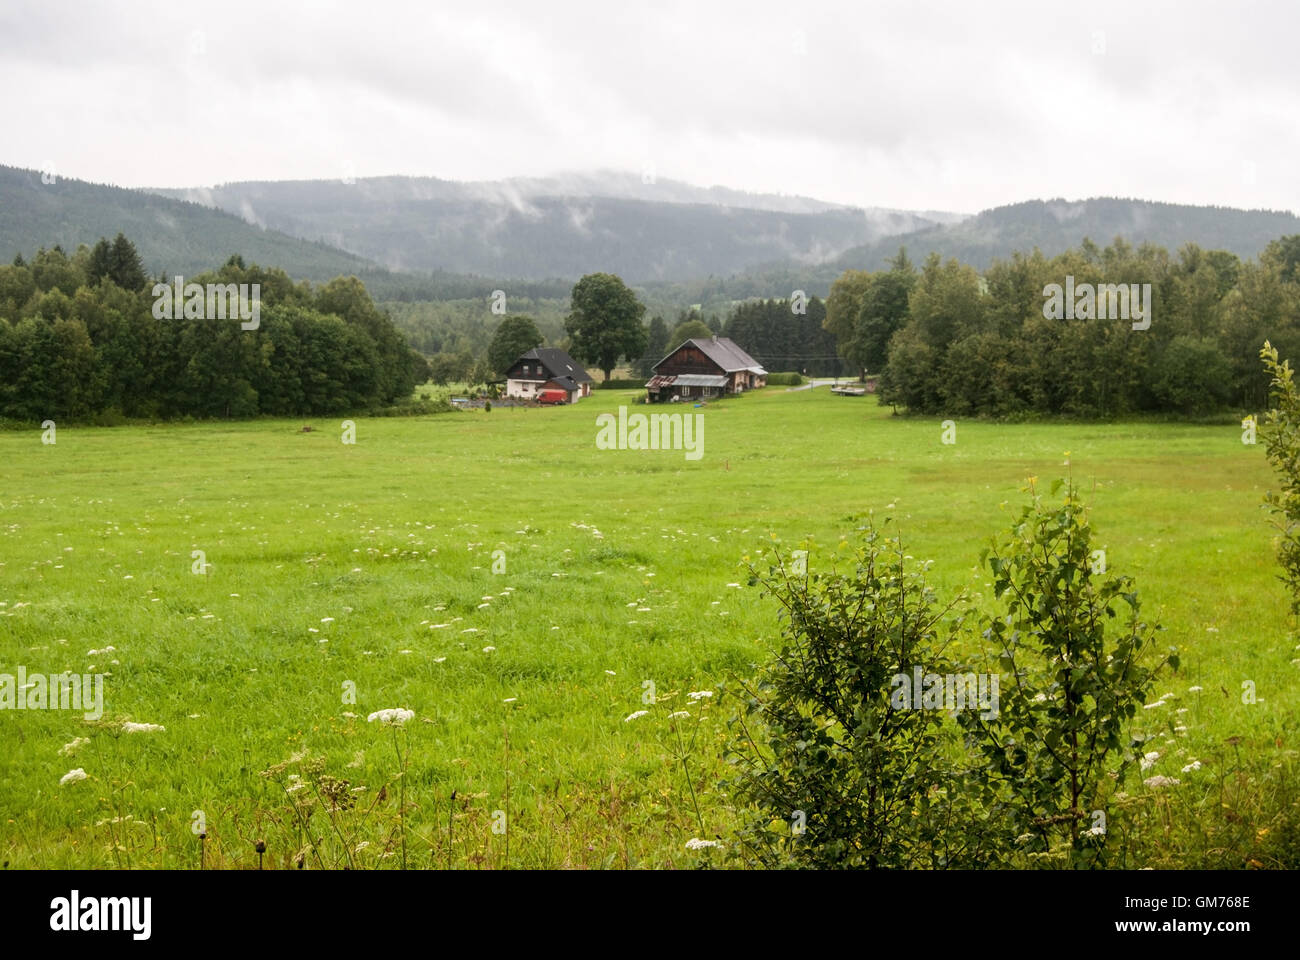 fresh meadow with trees, isolated houses and hills on the background near Borova Lada village in Sumava mountains Stock Photo